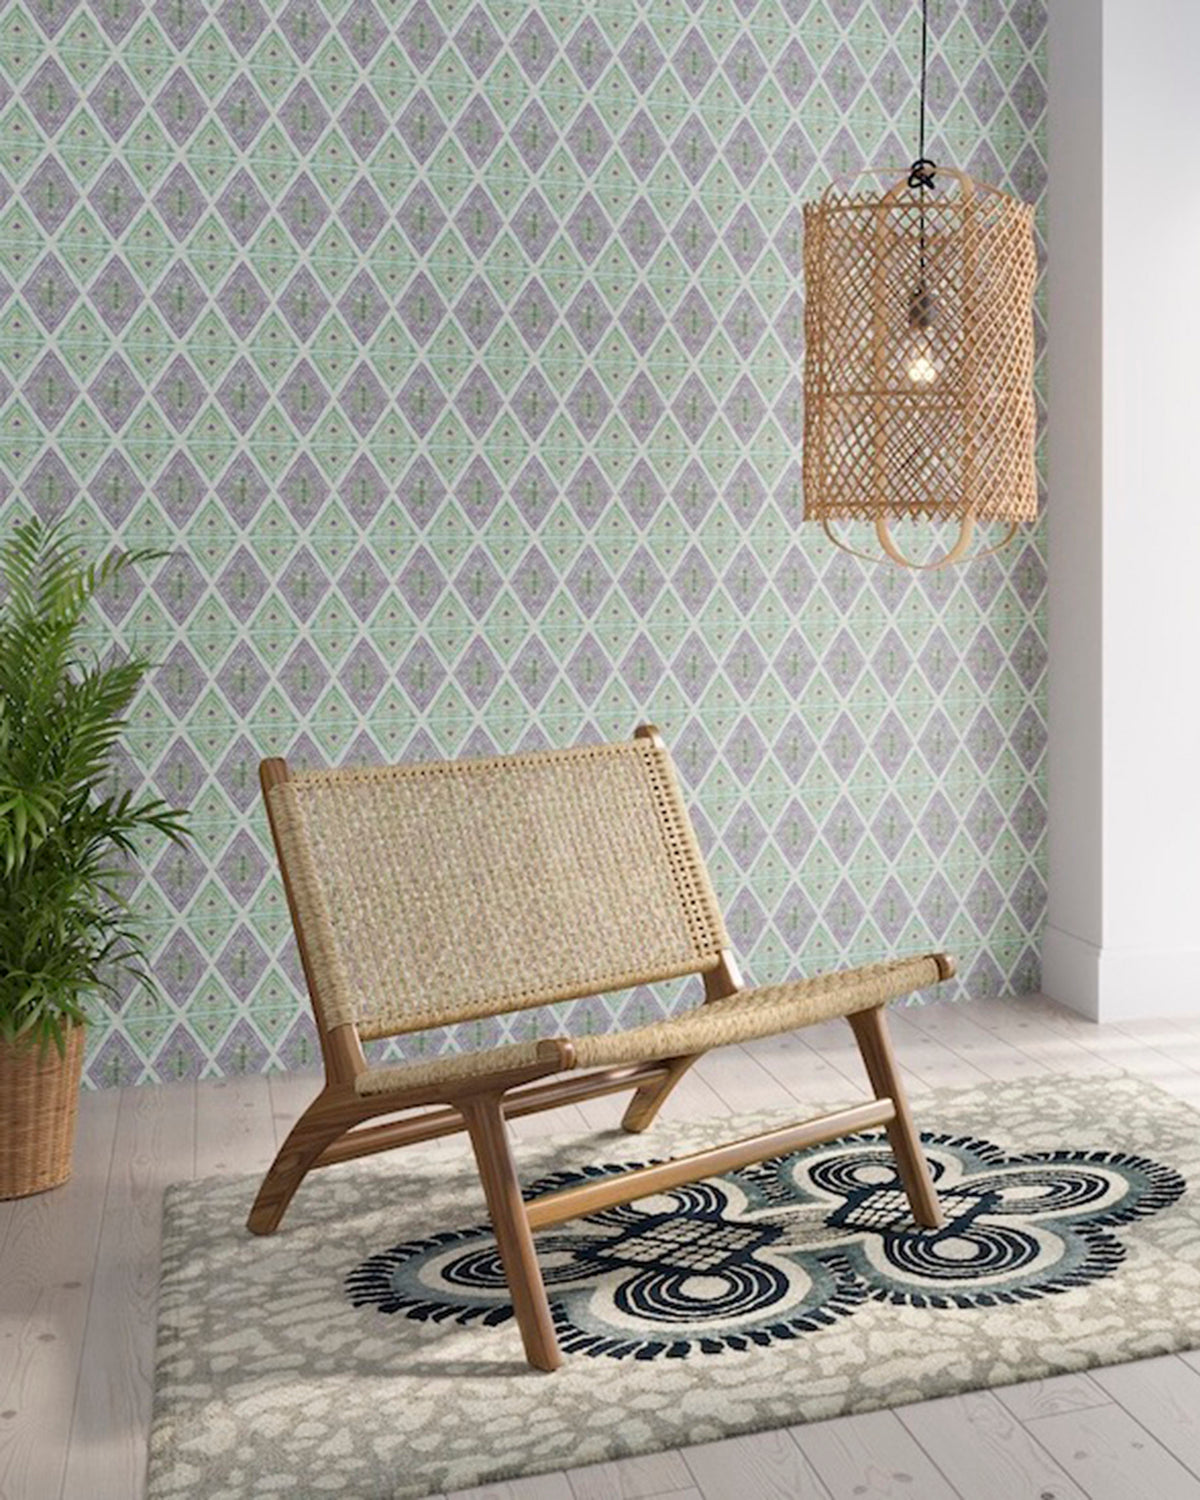 Styled living room tableau with a wall papered in an intricate diamond grid pattern in green and purple.